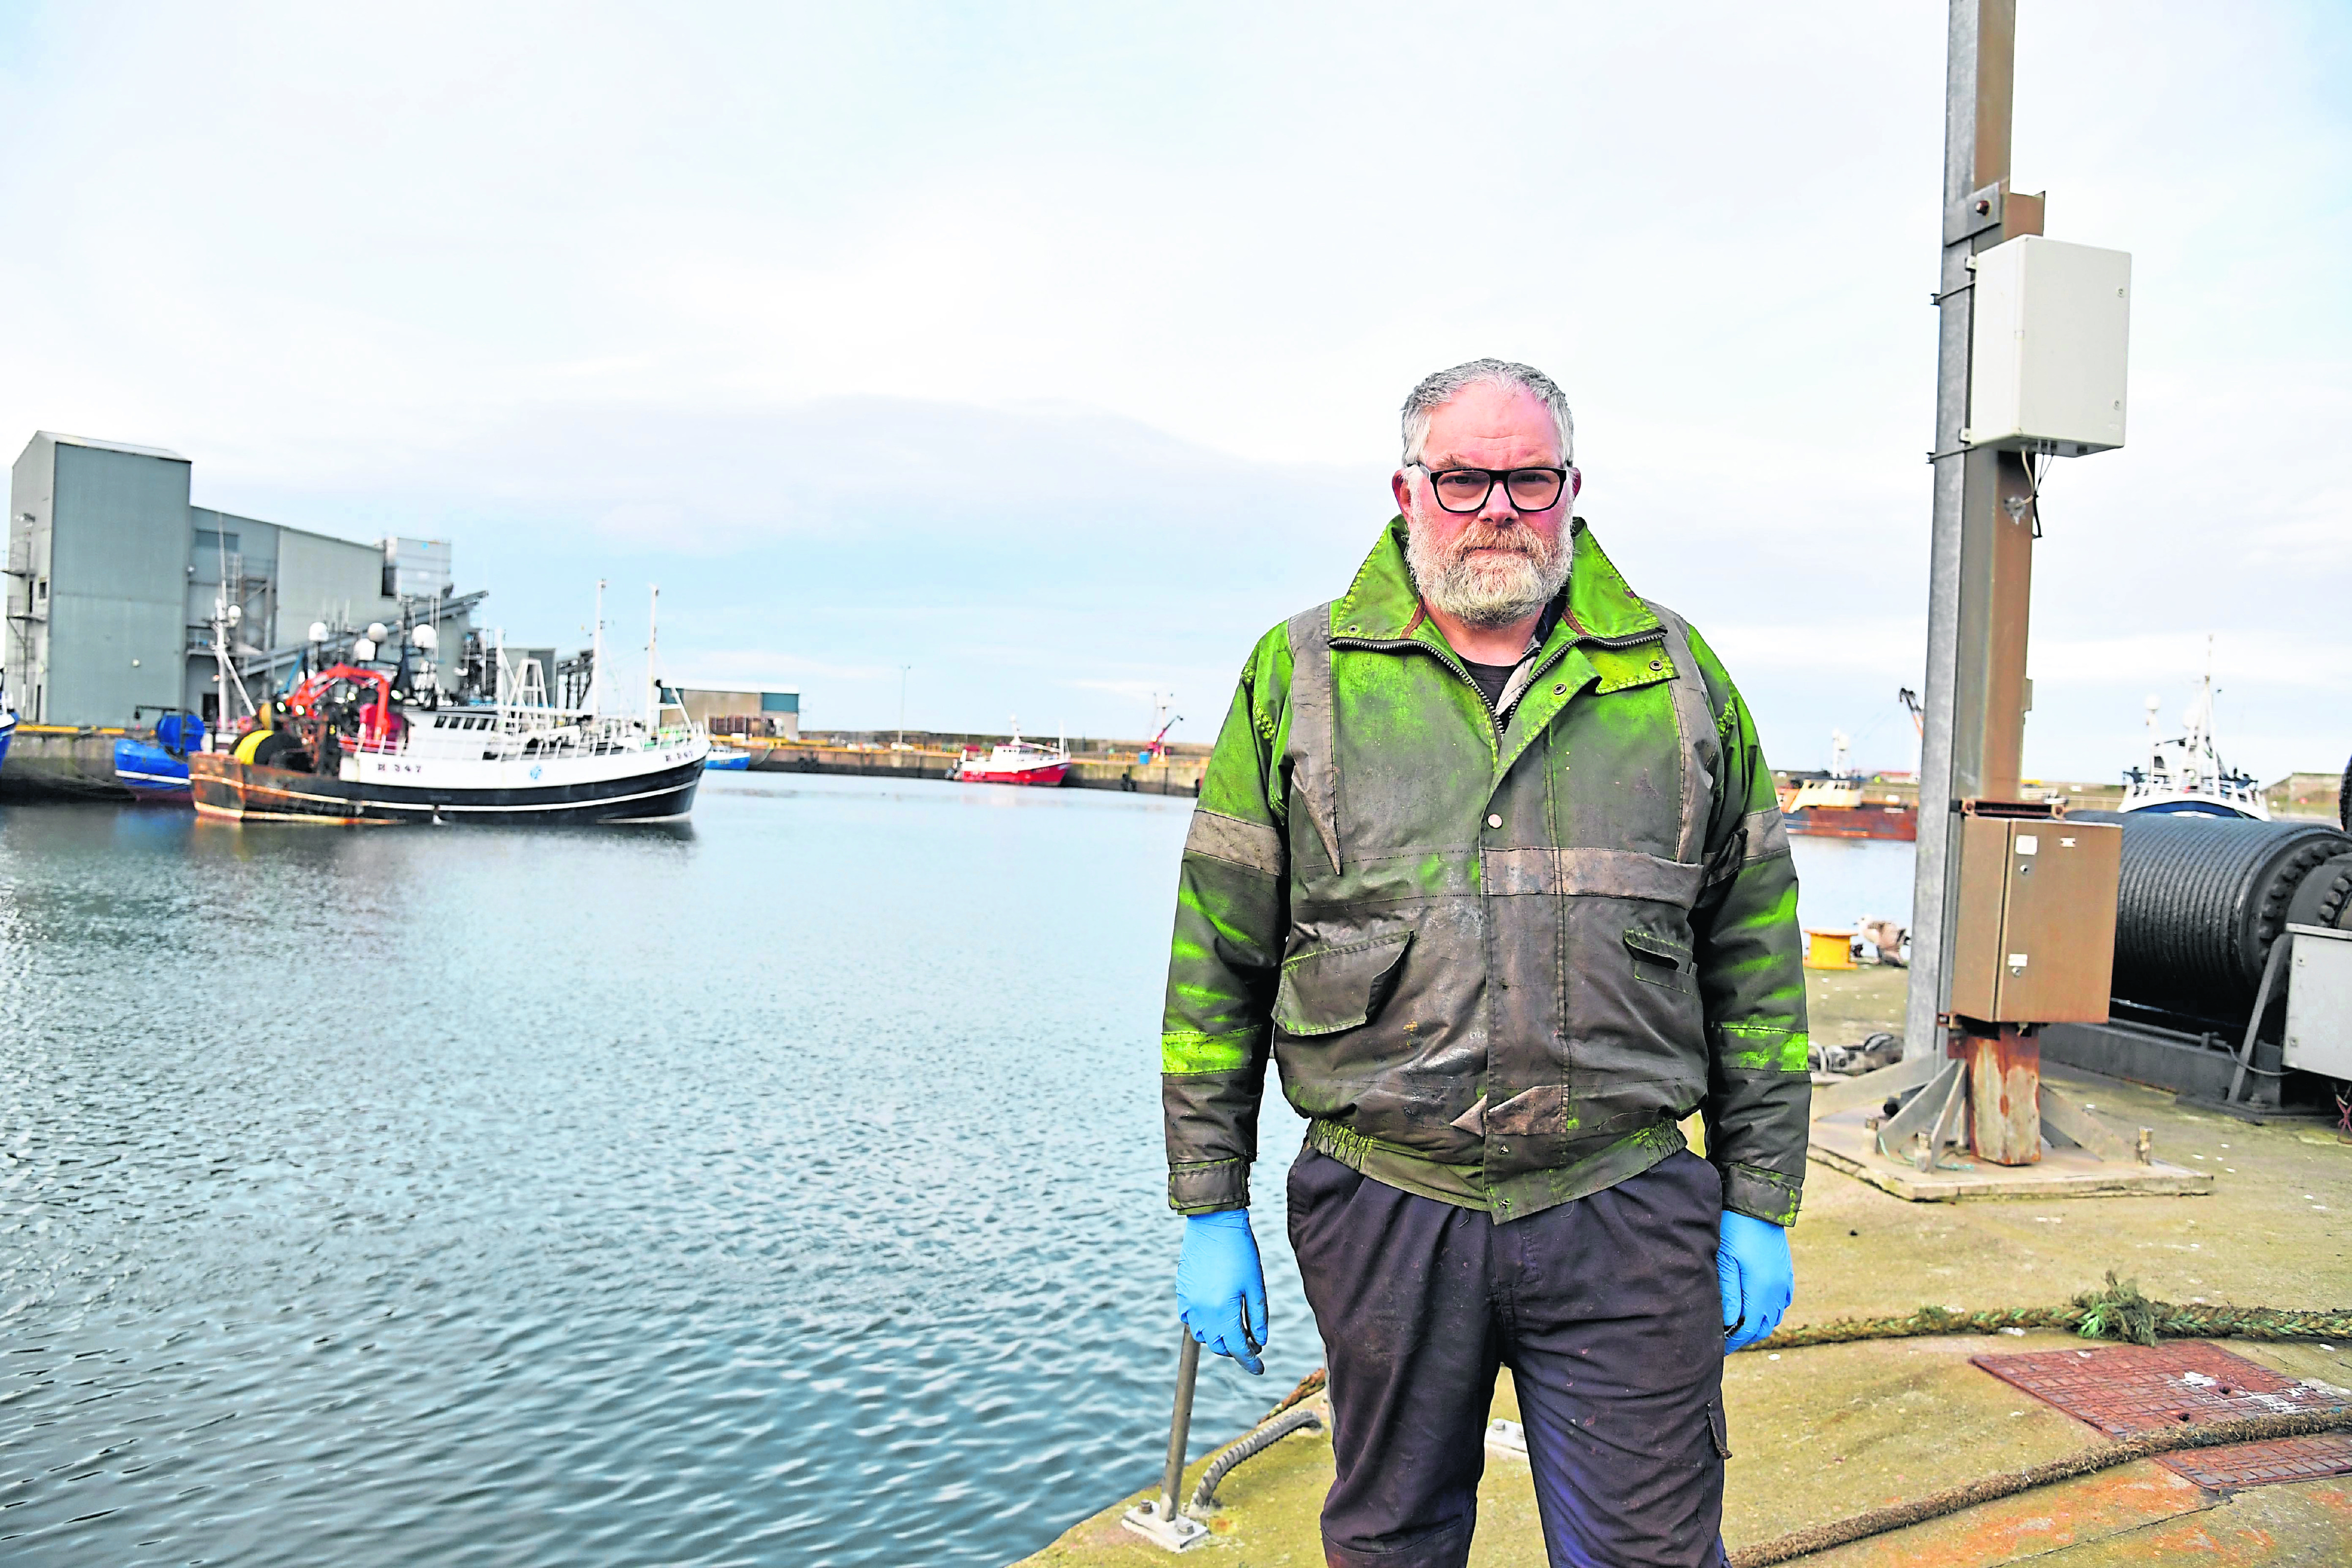 ‘weekly basis’: Mark Reason has insisted there is a dumping problem but Fraserburgh Harbour Commissioners have refuted his claims